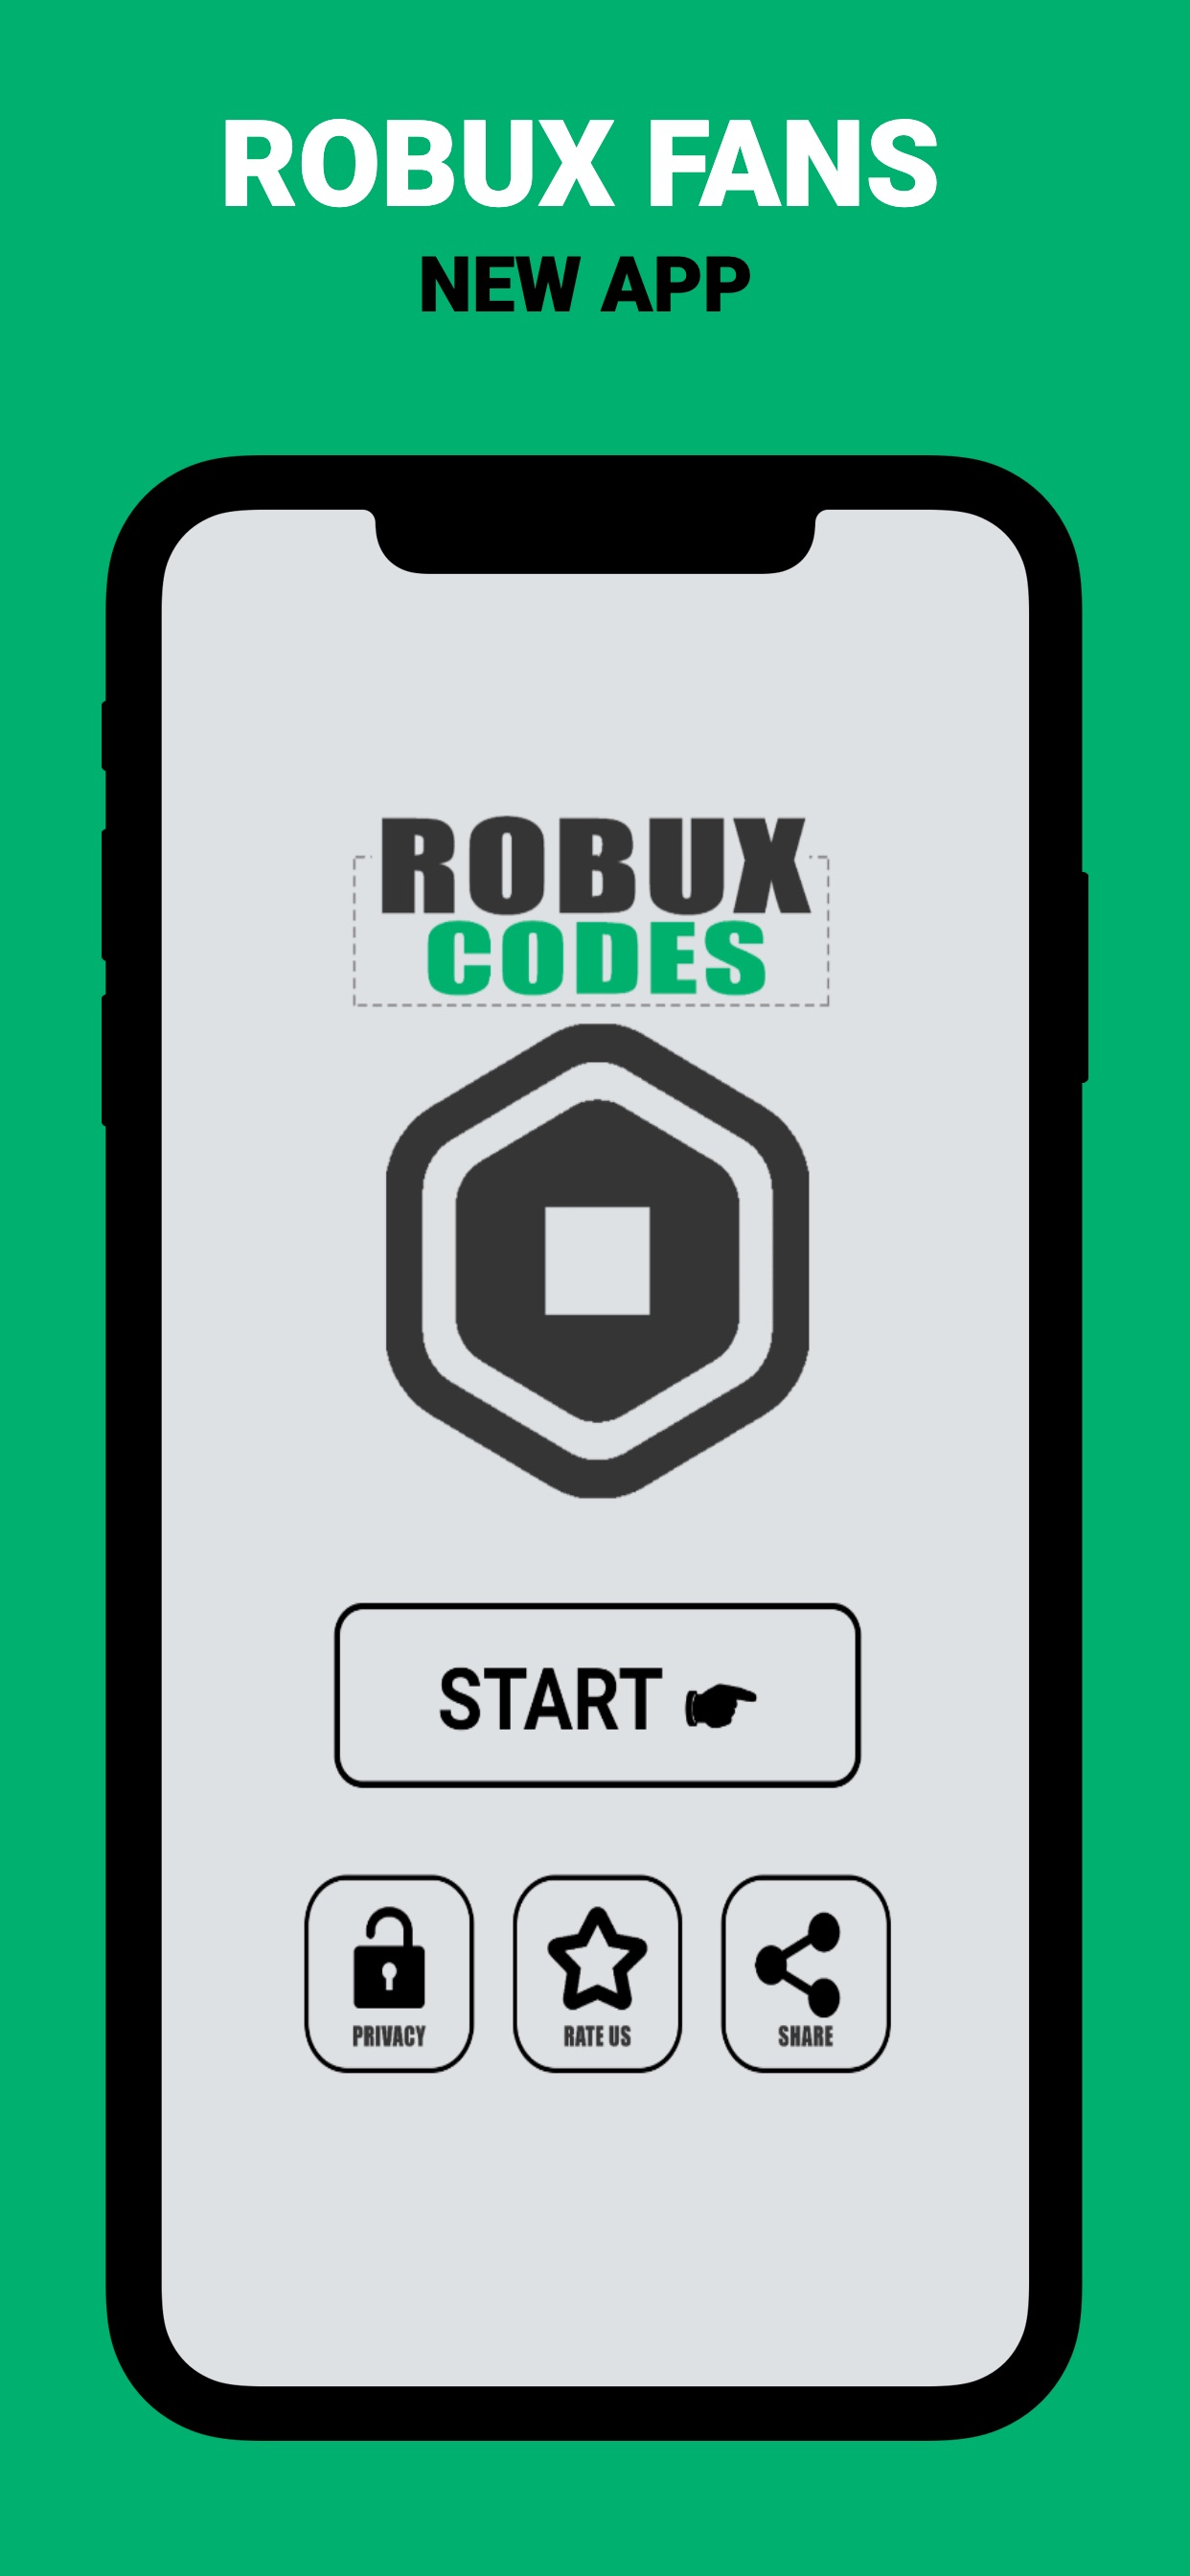 Robux Codes For Roblox App Store Review Aso Revenue Downloads Appfollow - how to get robux with code poke